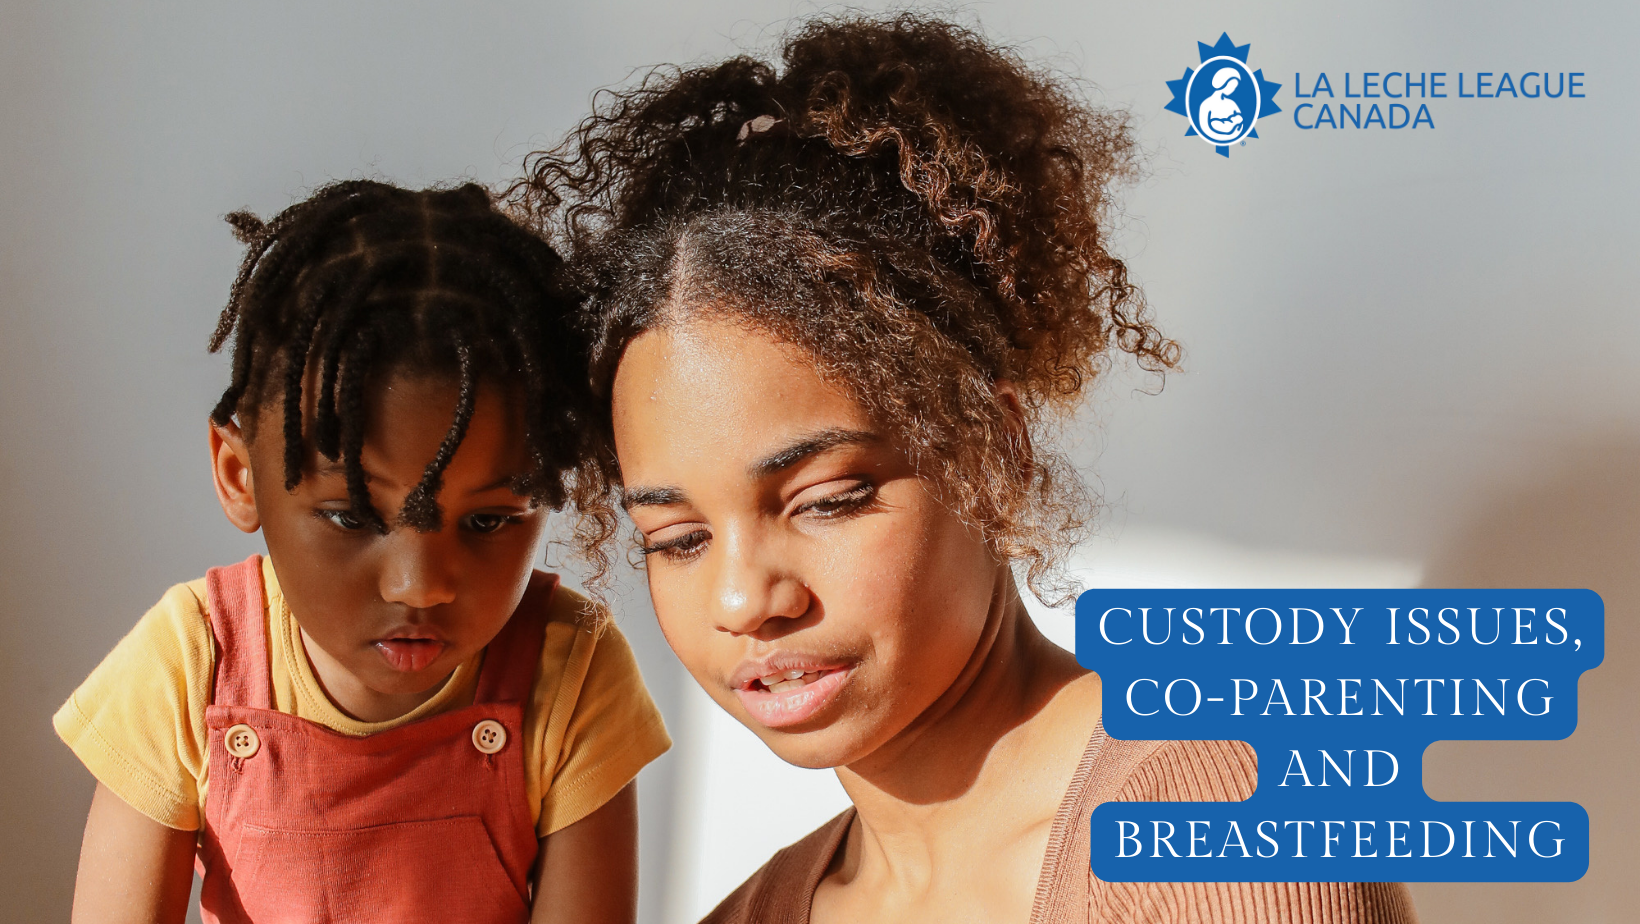 https://www.lllc.ca/sites/default/files/Custody%20Issues%2C%20Co-parenting%20and%20Breastfeeding.png